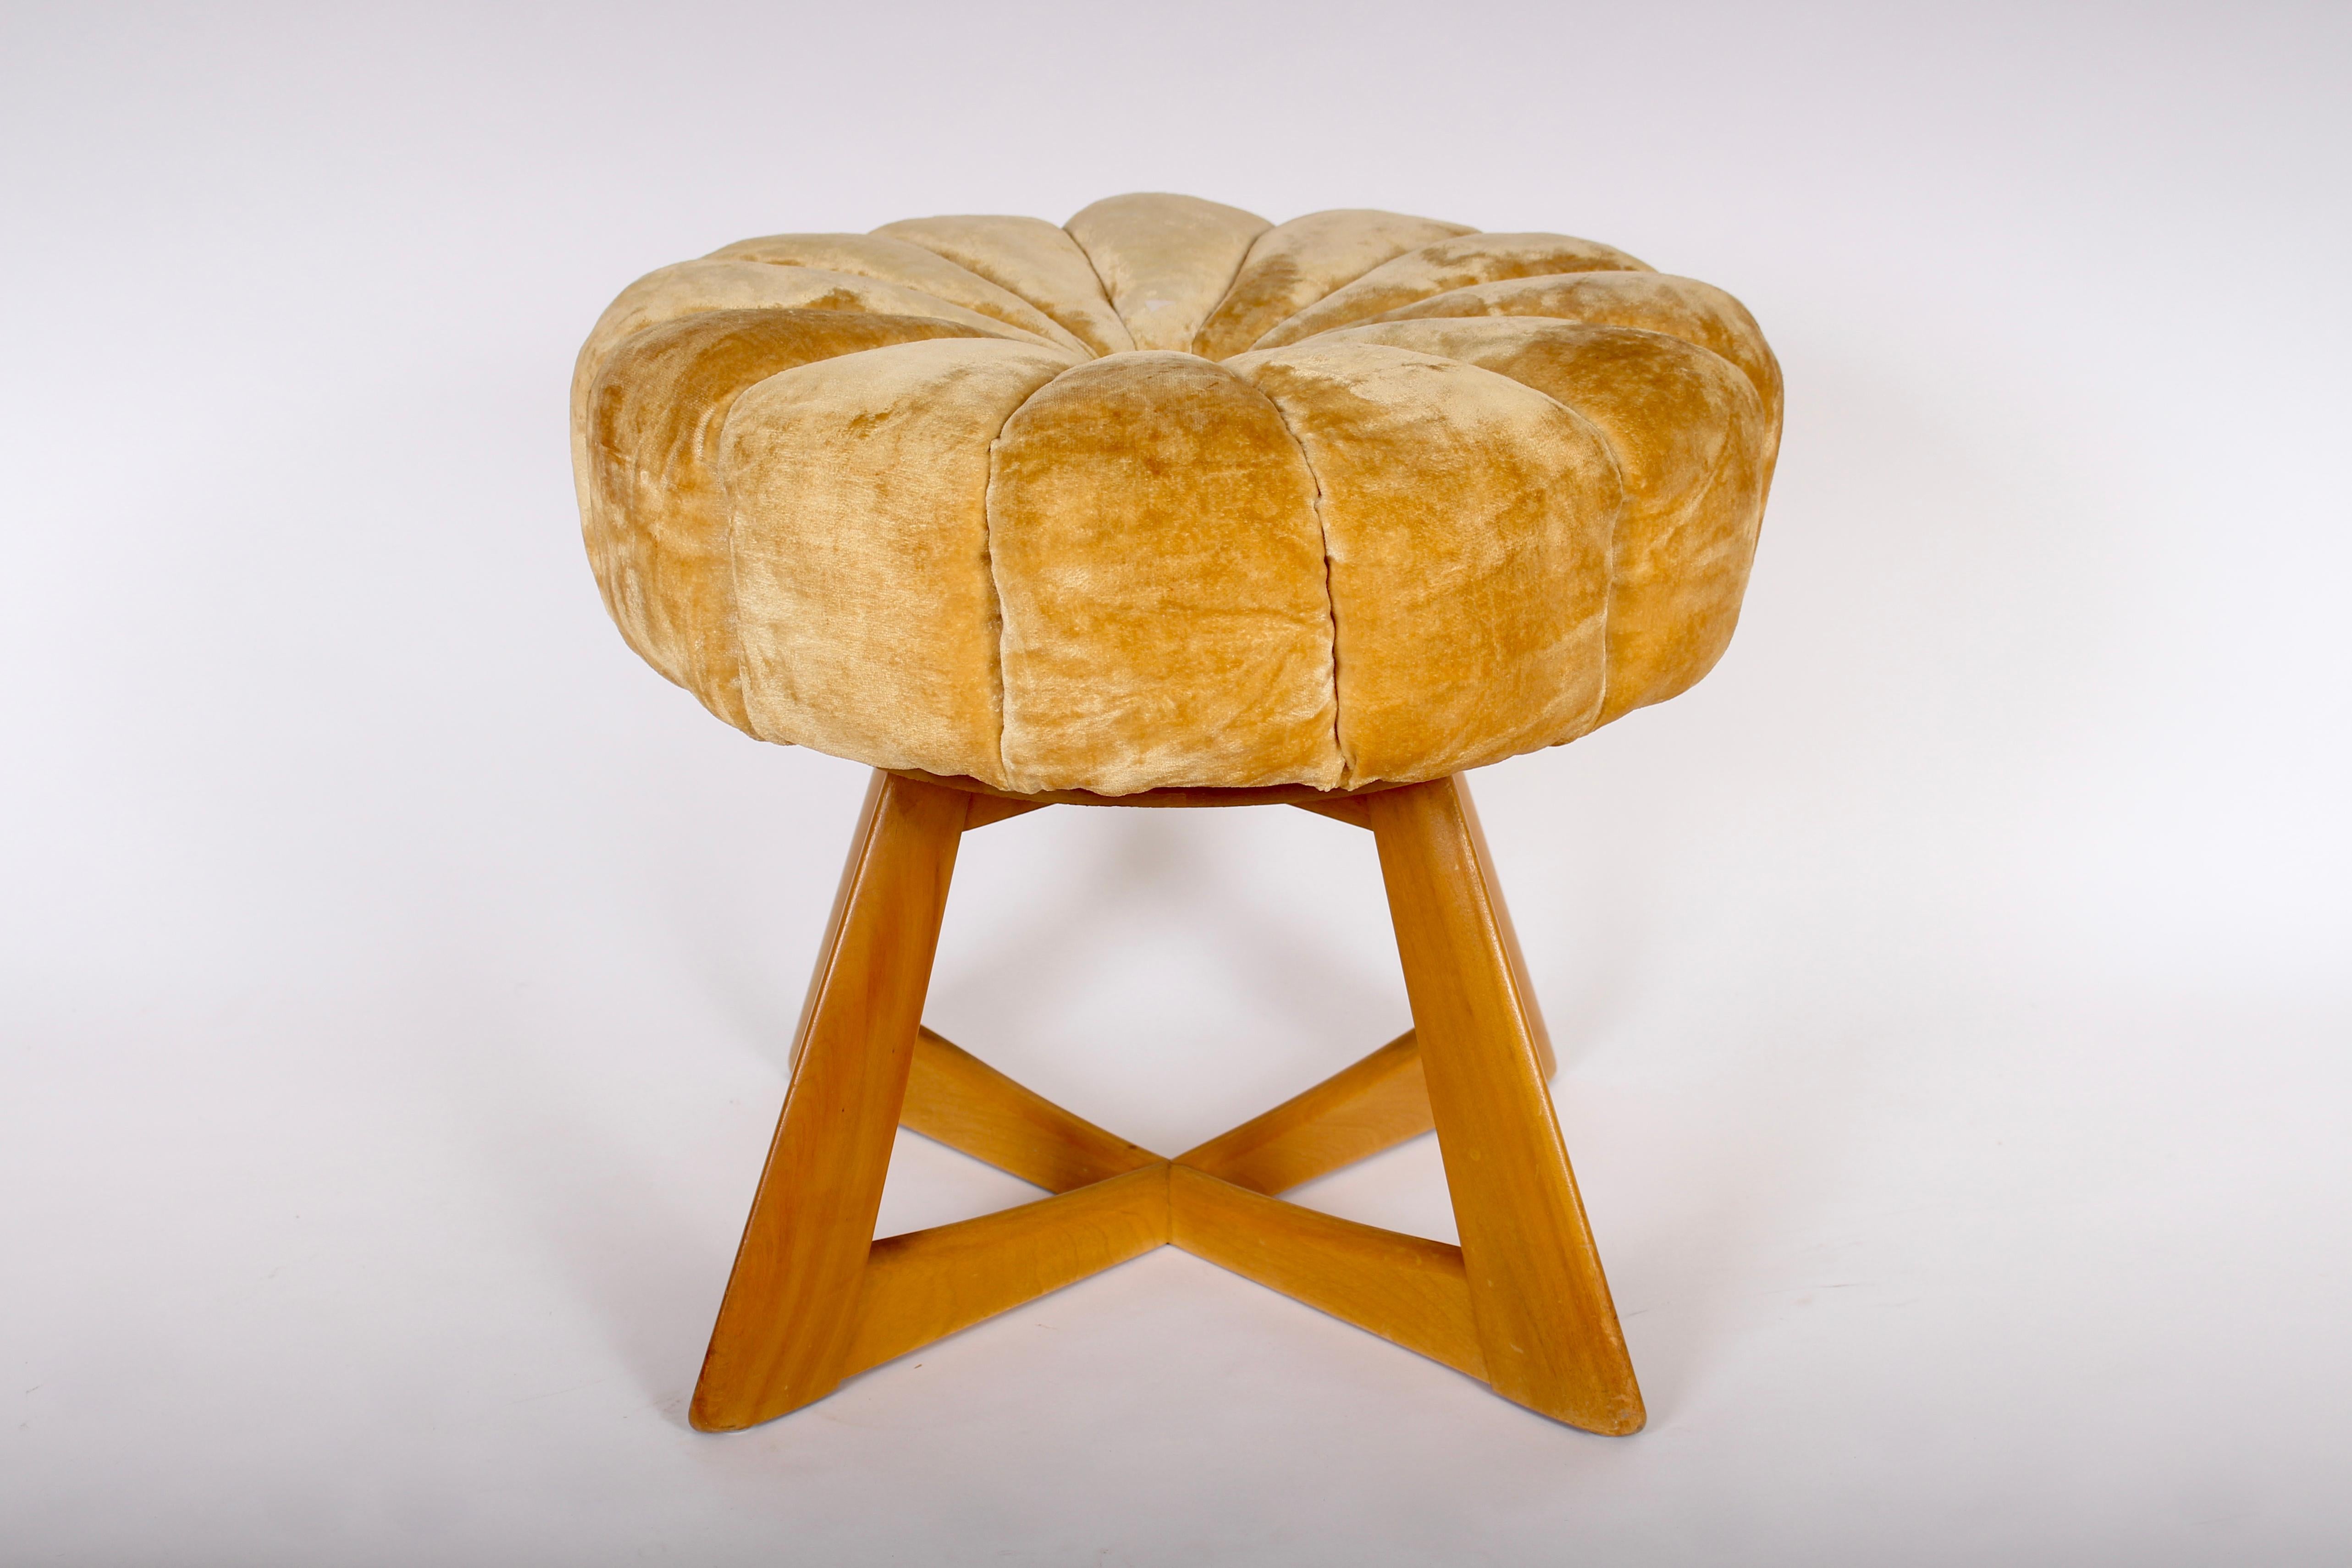 Heywood Wakefield sculptura swivel ottoman pouf vanity stool in maple. Cross leg base. With tufted and scalloped crushed velvet seat in mustard yellow. Wheat finish. Sturdy. Solid. Rarity. Stamped with makers mark to underside.